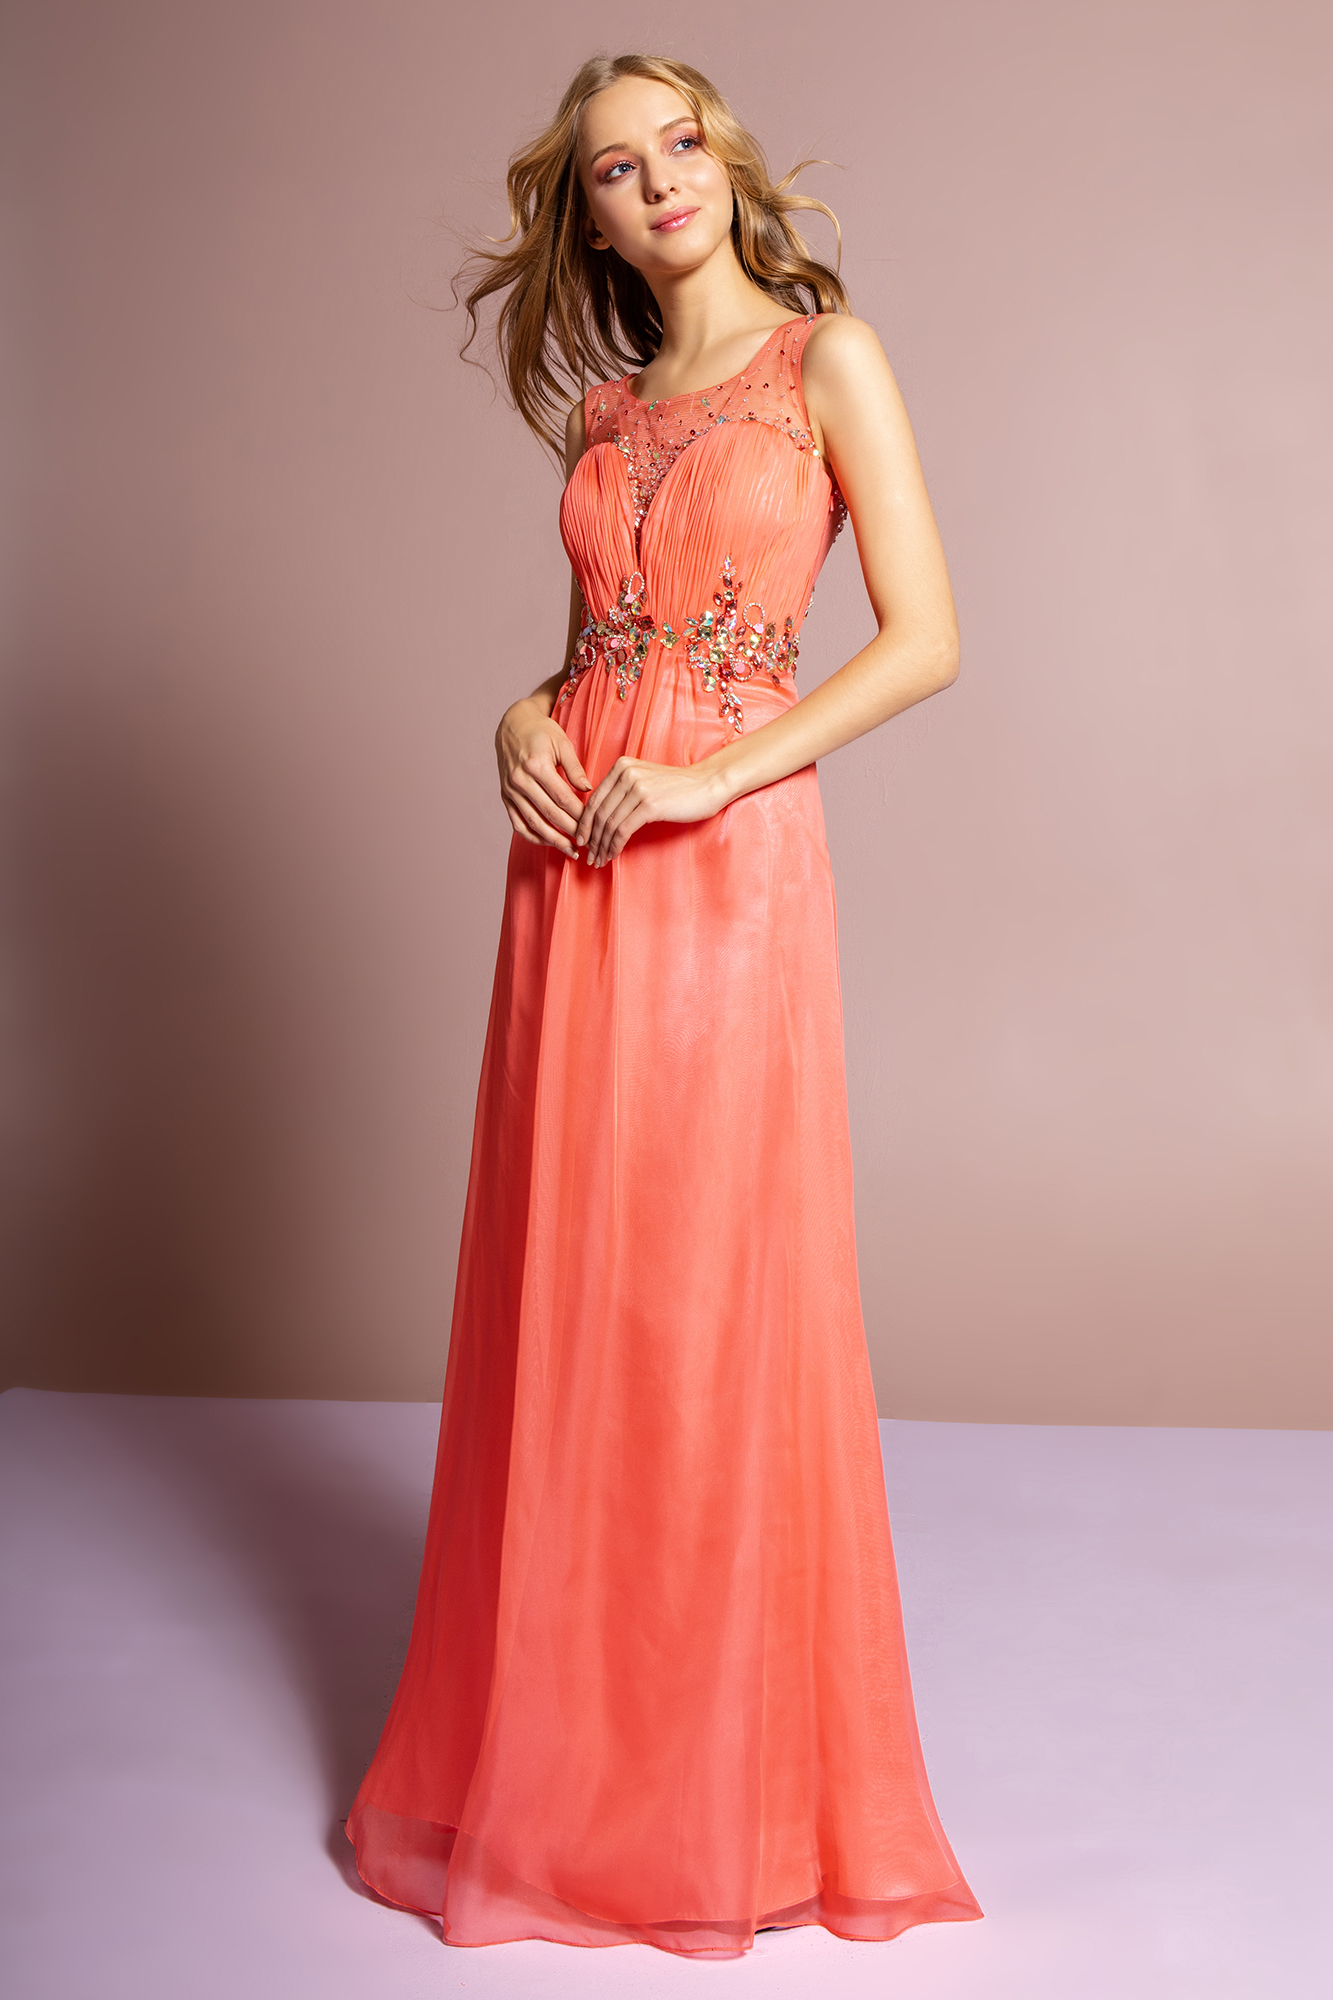 woman in coral gown